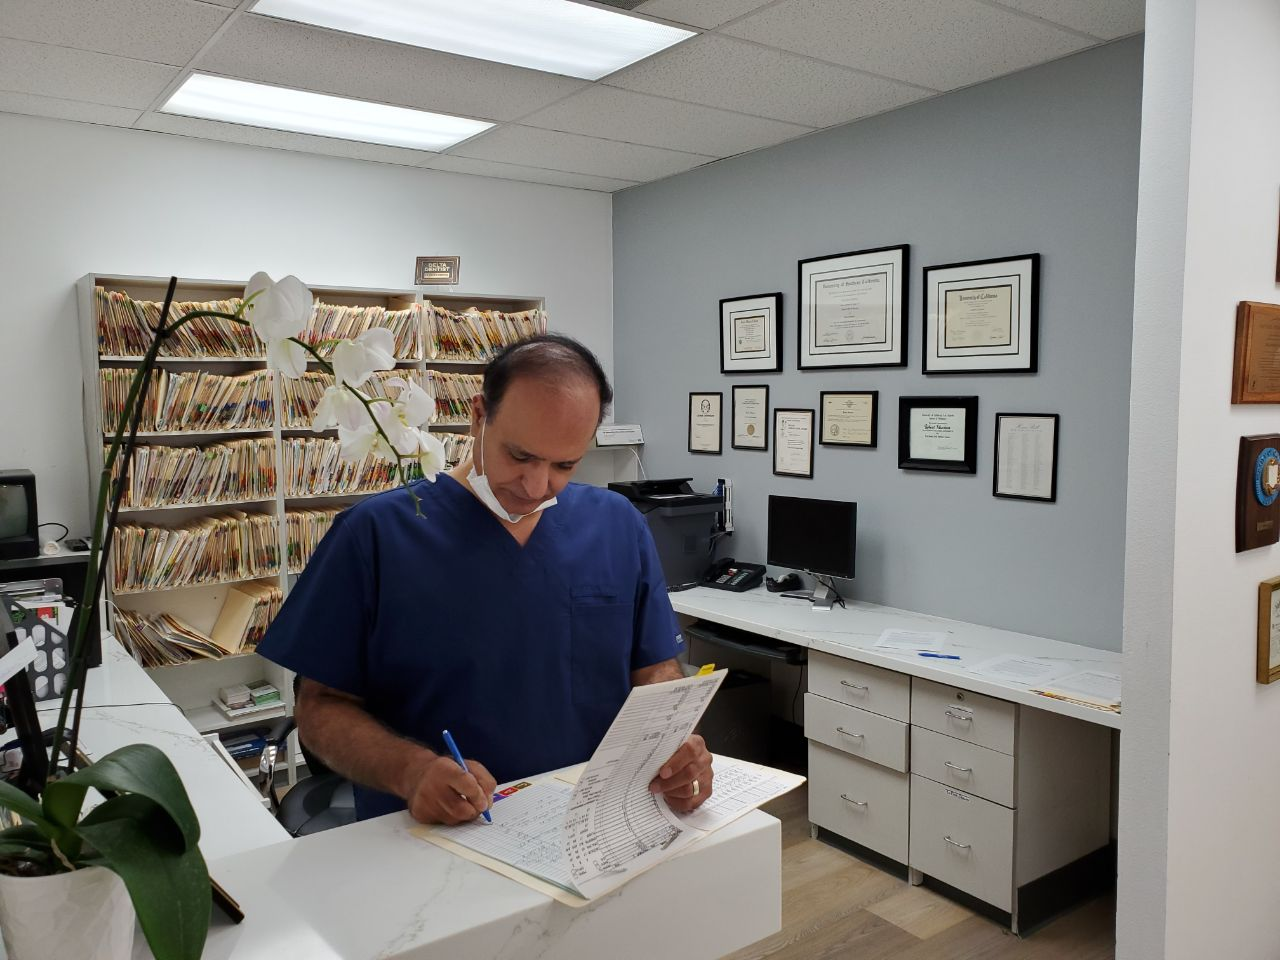 An image of a doctor working in his office